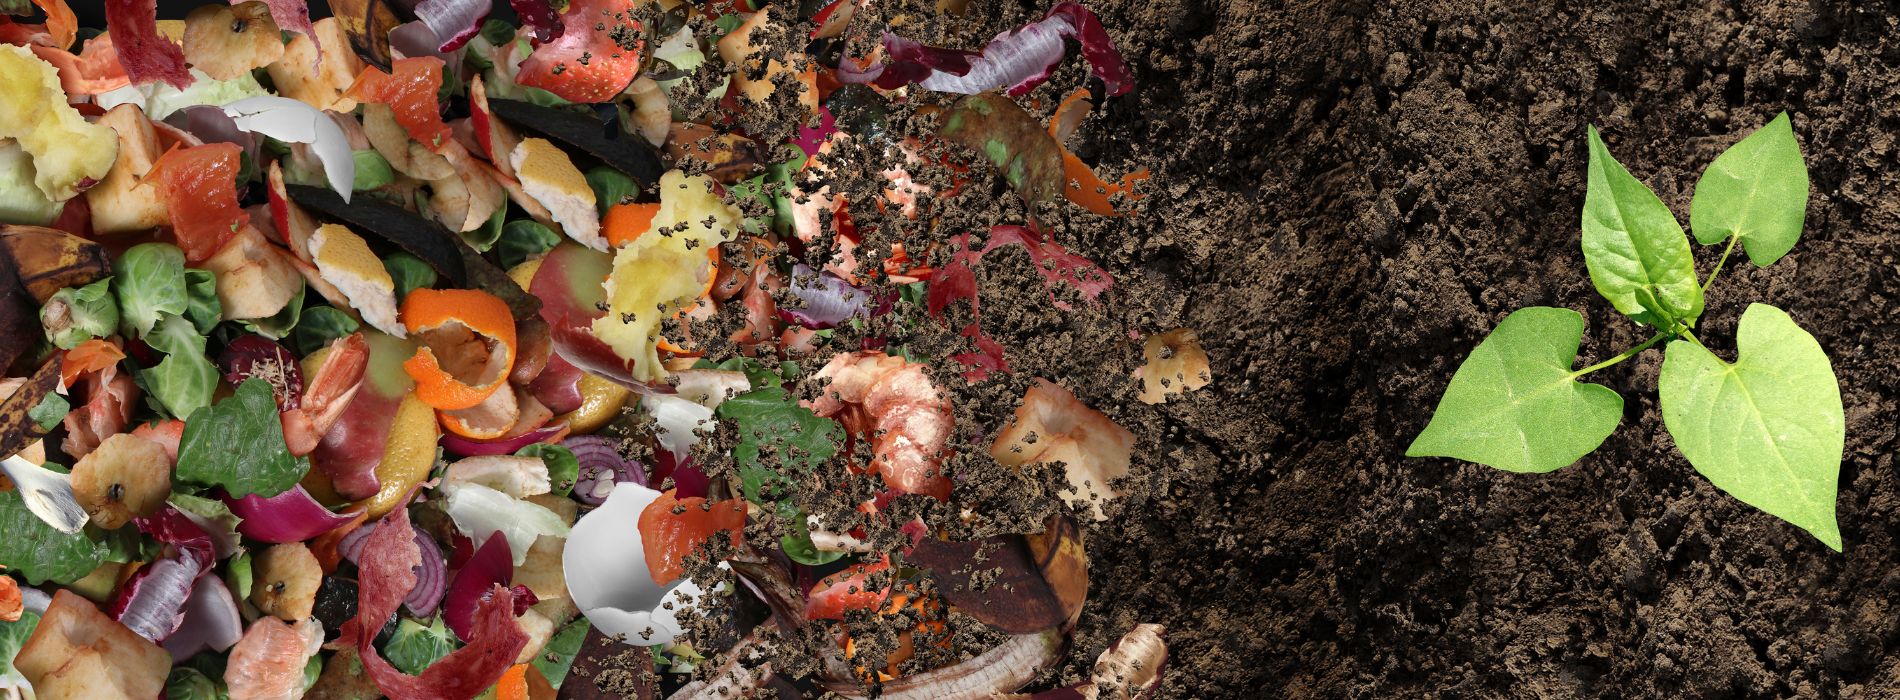 Composting: a Sustainable Way to Manage Organic Waste